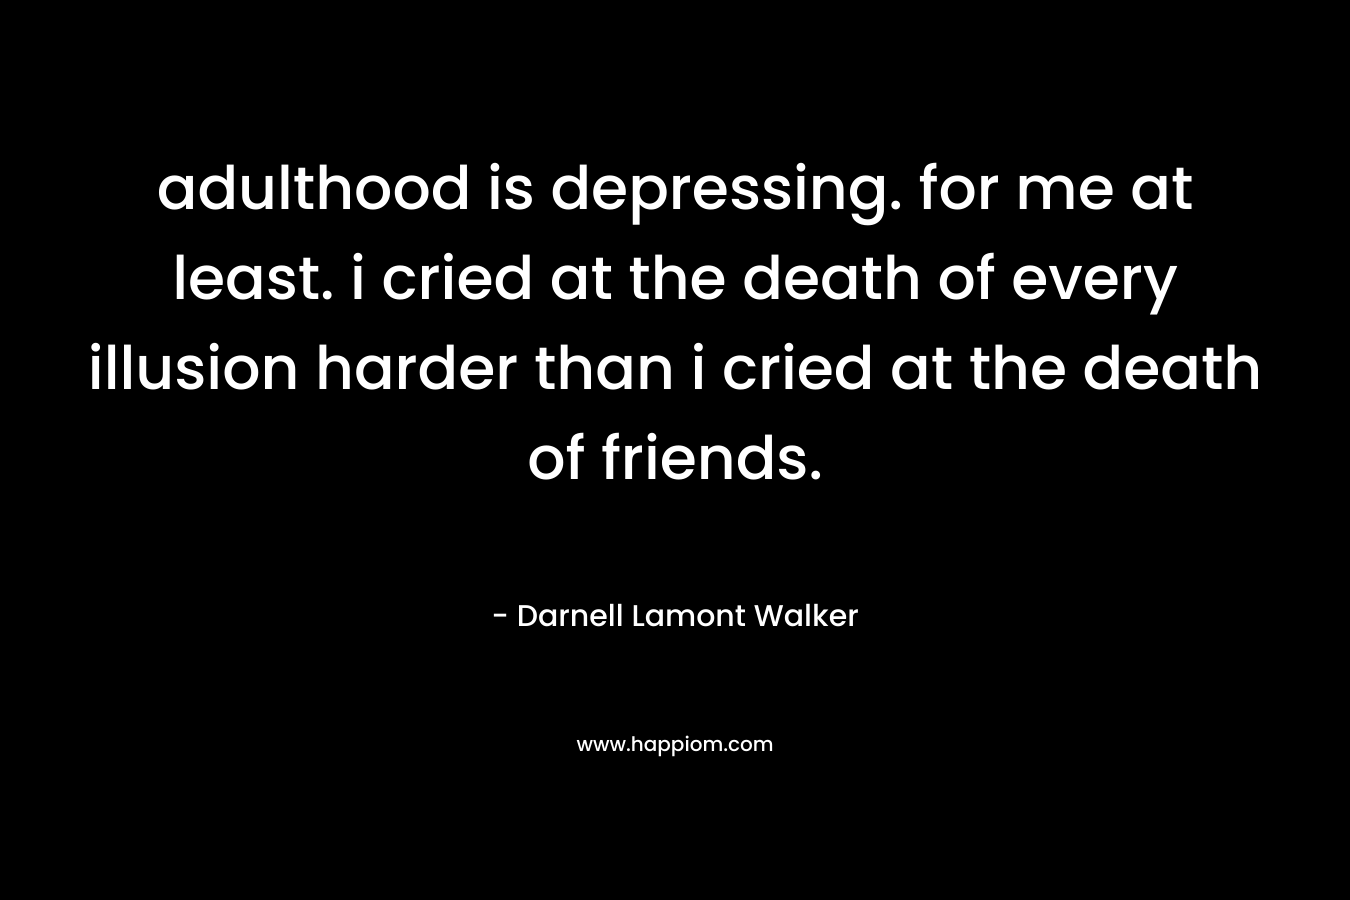 adulthood is depressing. for me at least. i cried at the death of every illusion harder than i cried at the death of friends.